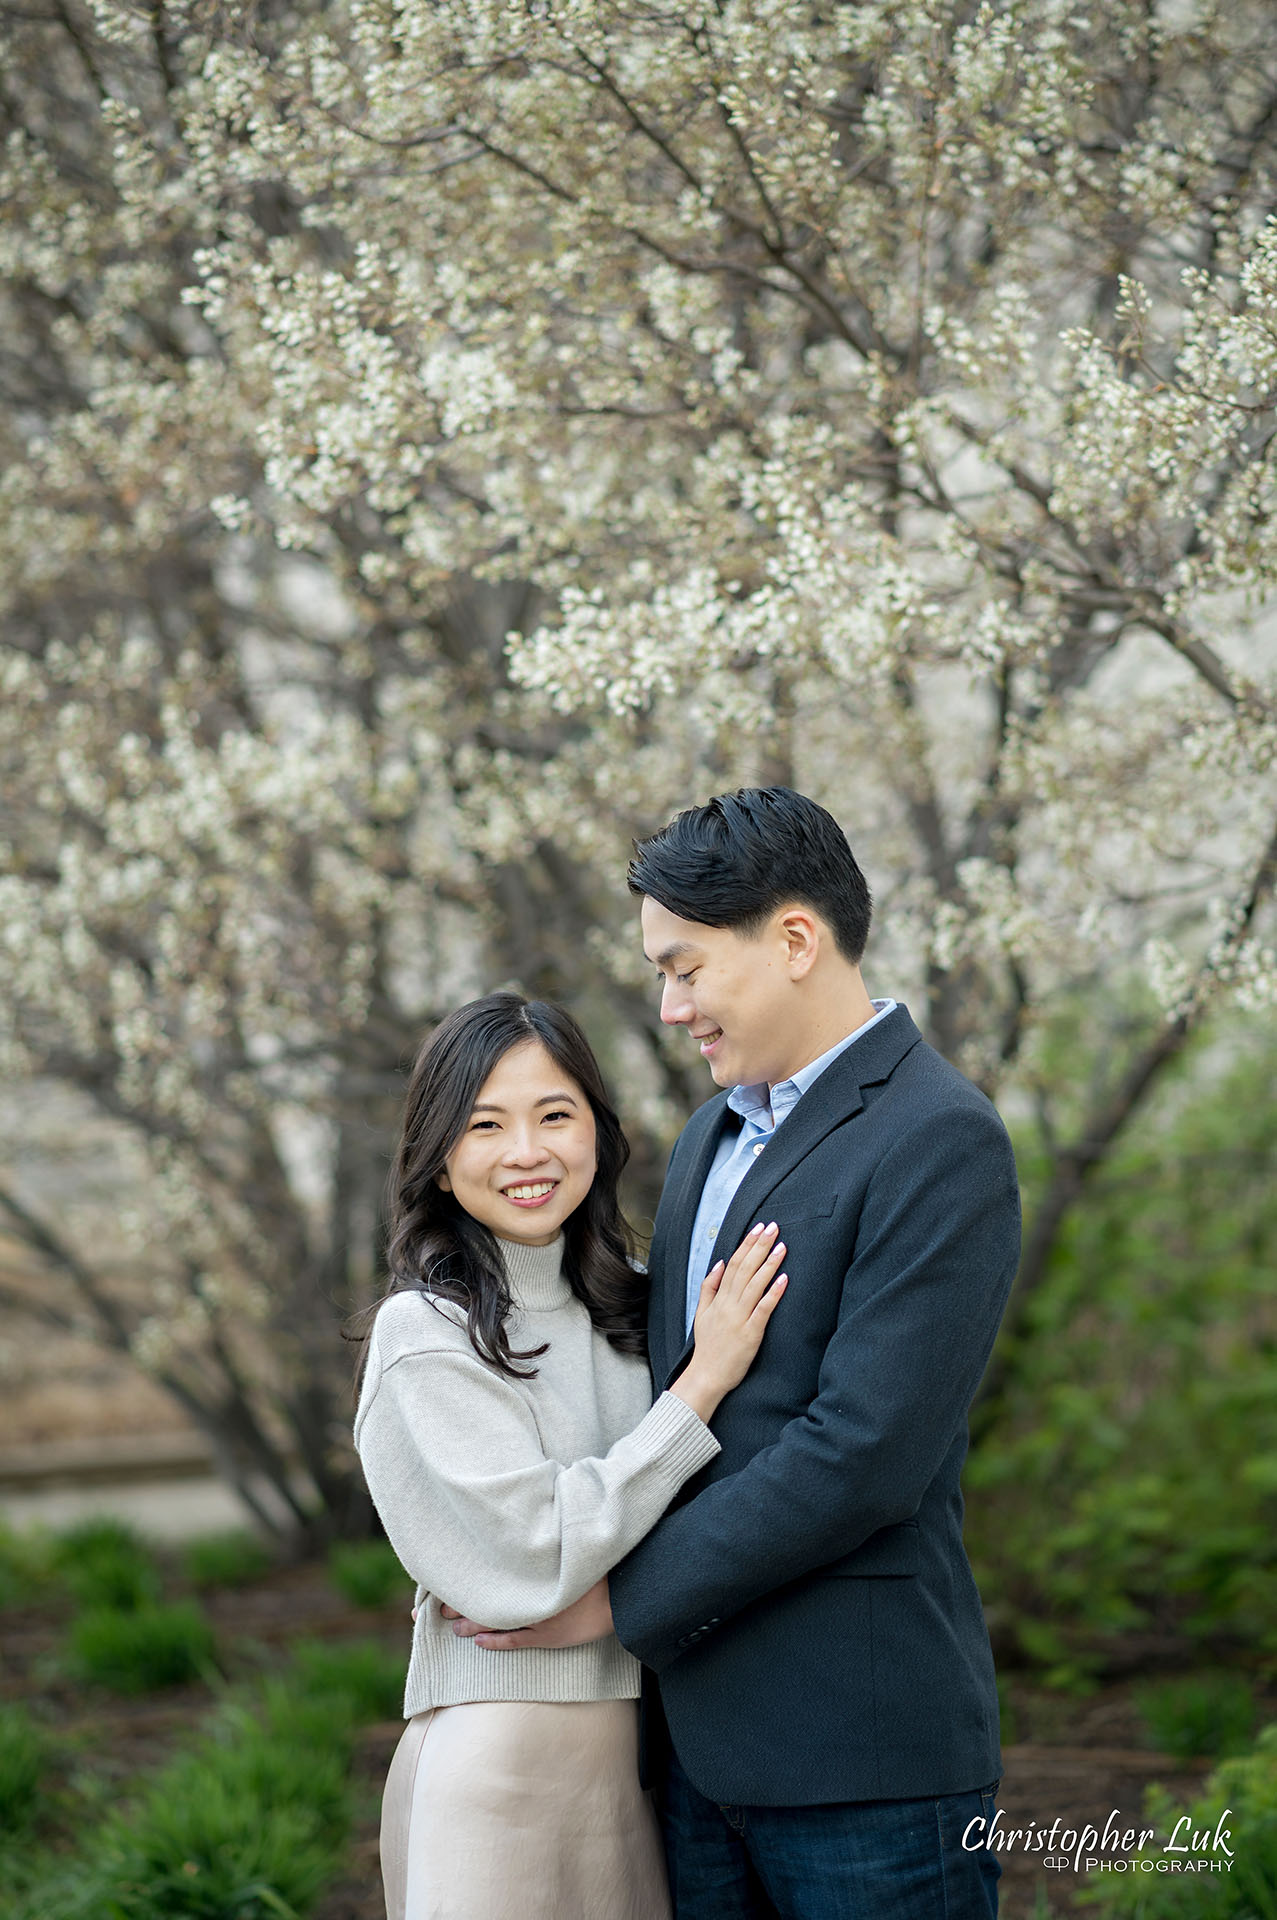 Bride Groom Portrait Spring Blossoms Engagement Pictures Smile Candid Natural Organic Photojournalistic